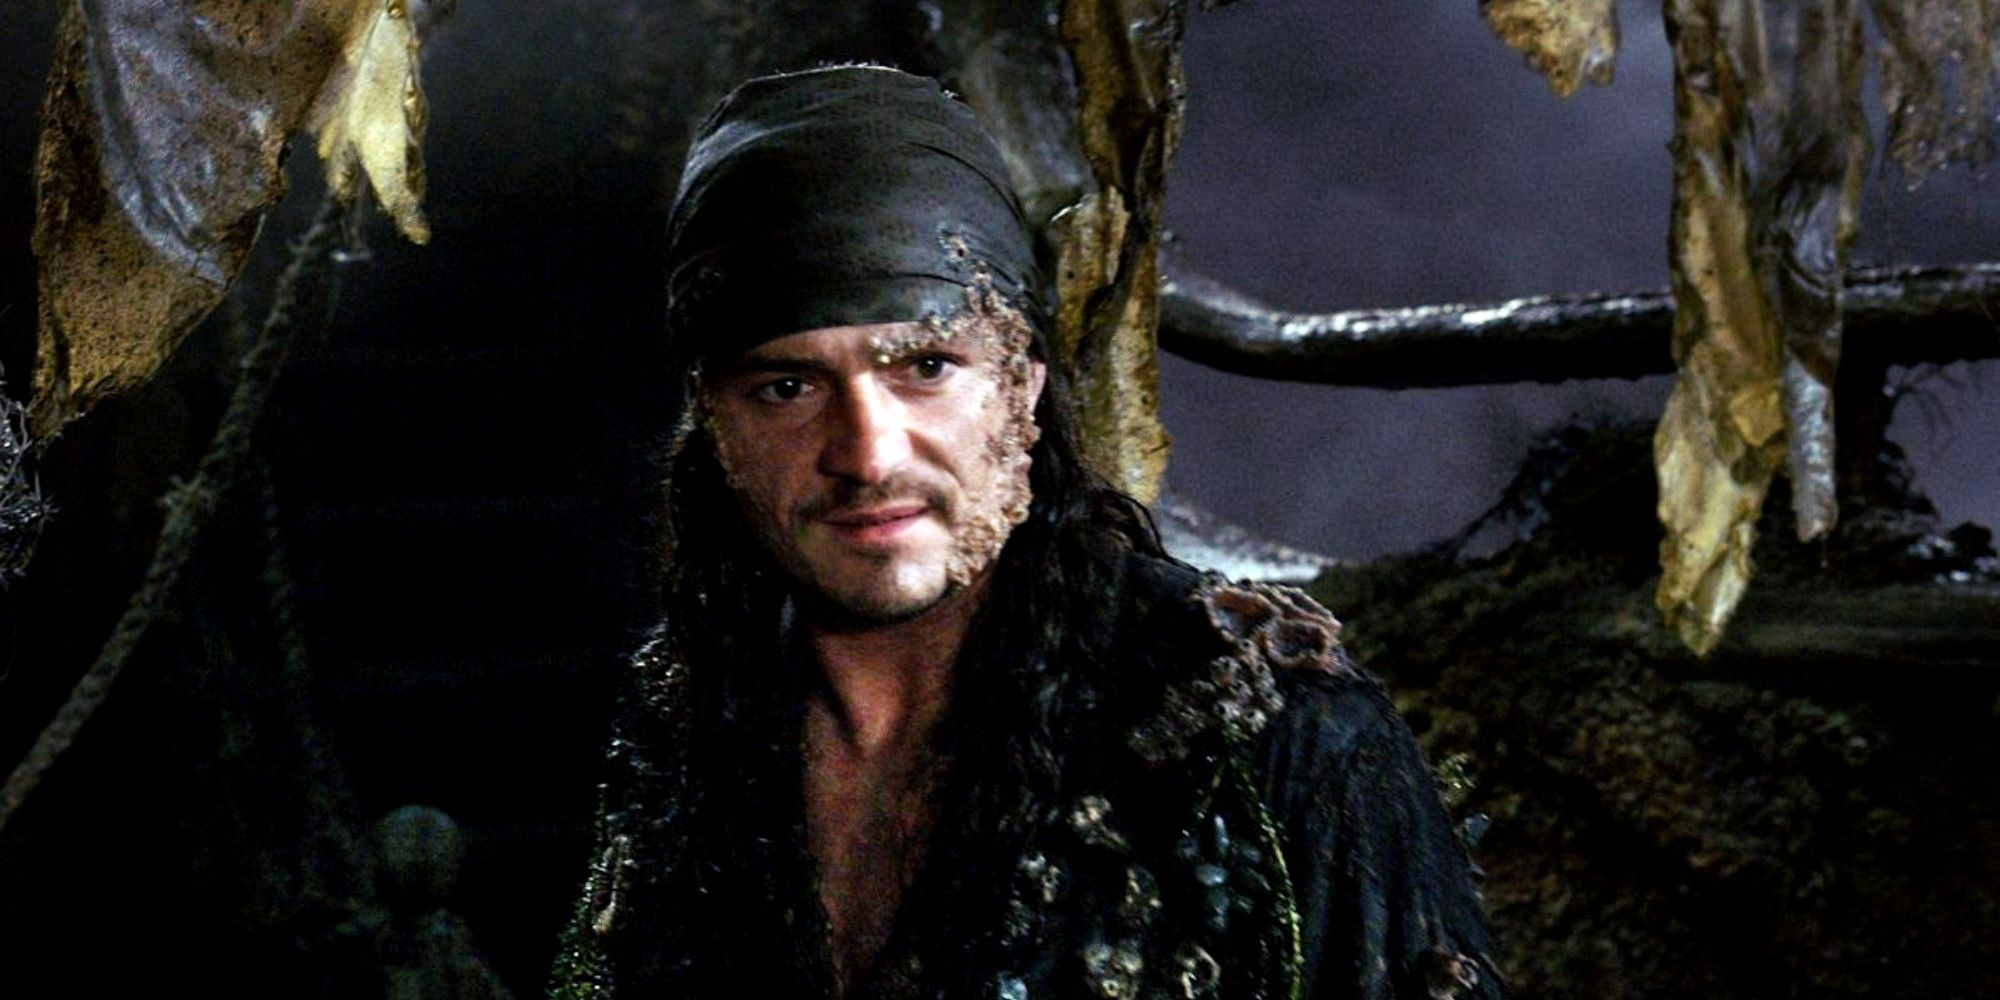 Will Turner dipped in barnacles on the Flying Dutchman in Pirates of the Caribbean